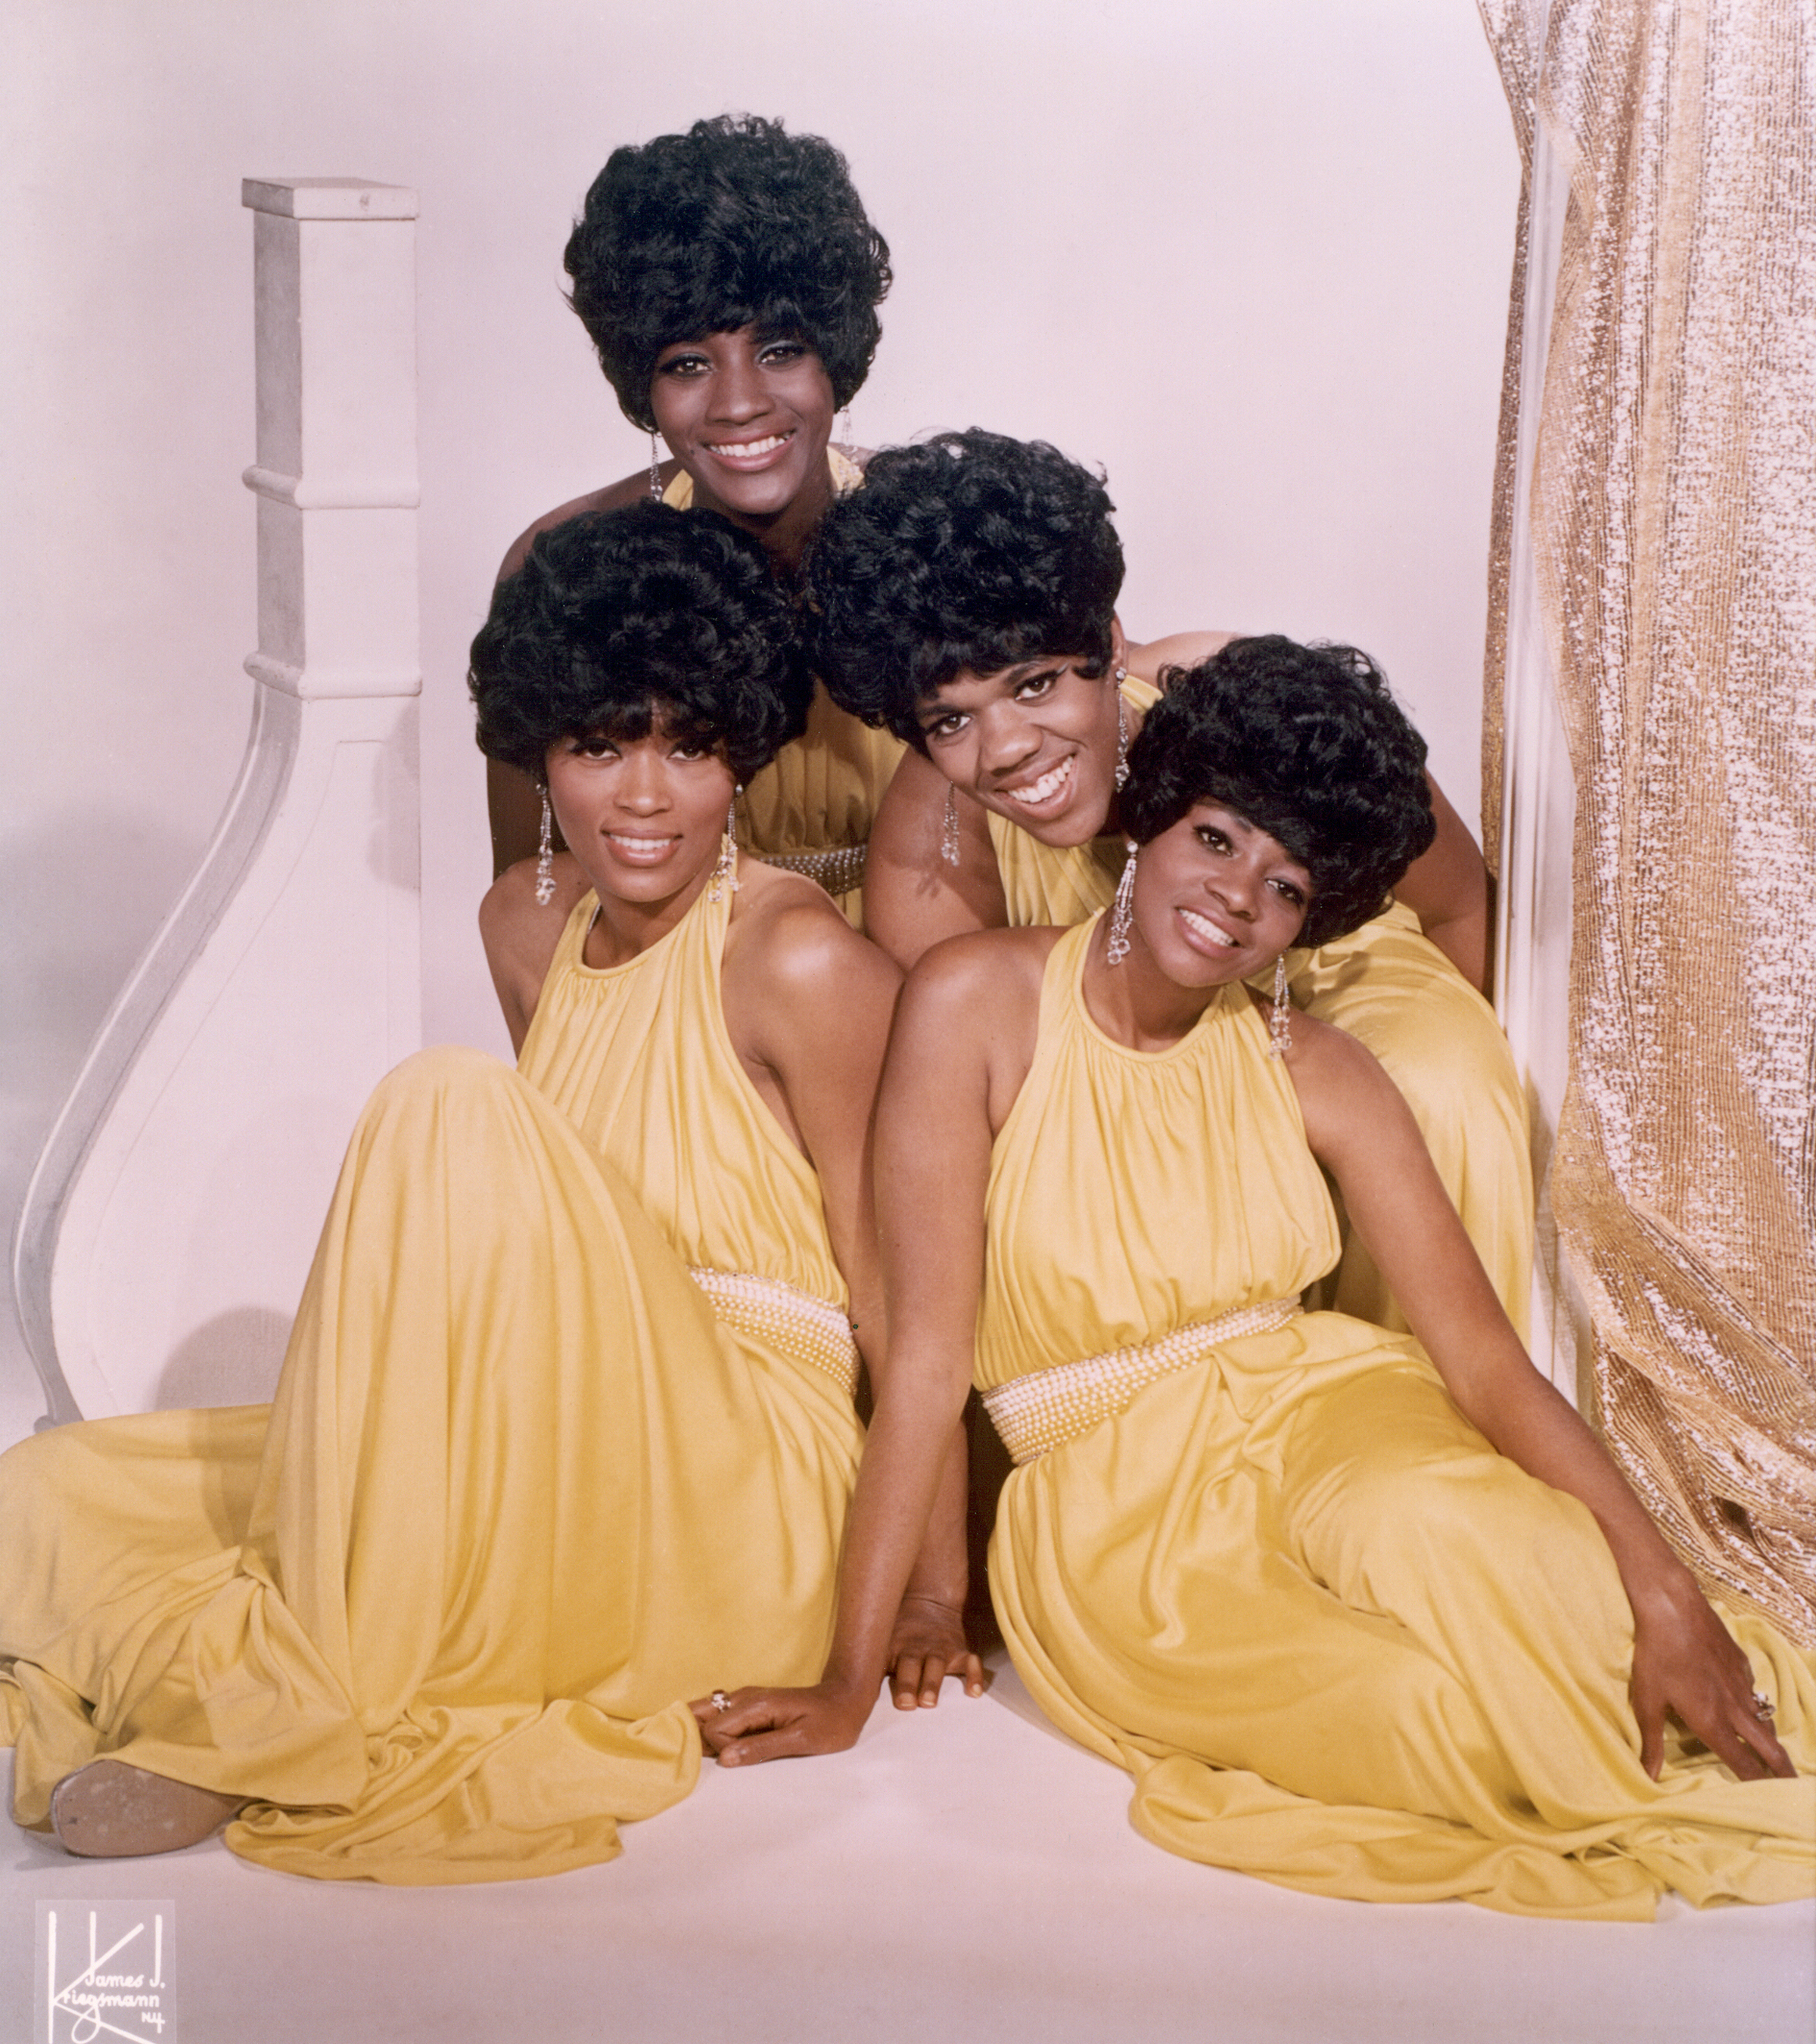 Myrna Smith, Sylvia Shemwell, Estelle Brown and Cissy Houston as part of the singing group  "The Sweet Inspirations" in New York in 1967 | Source: Getty Images.